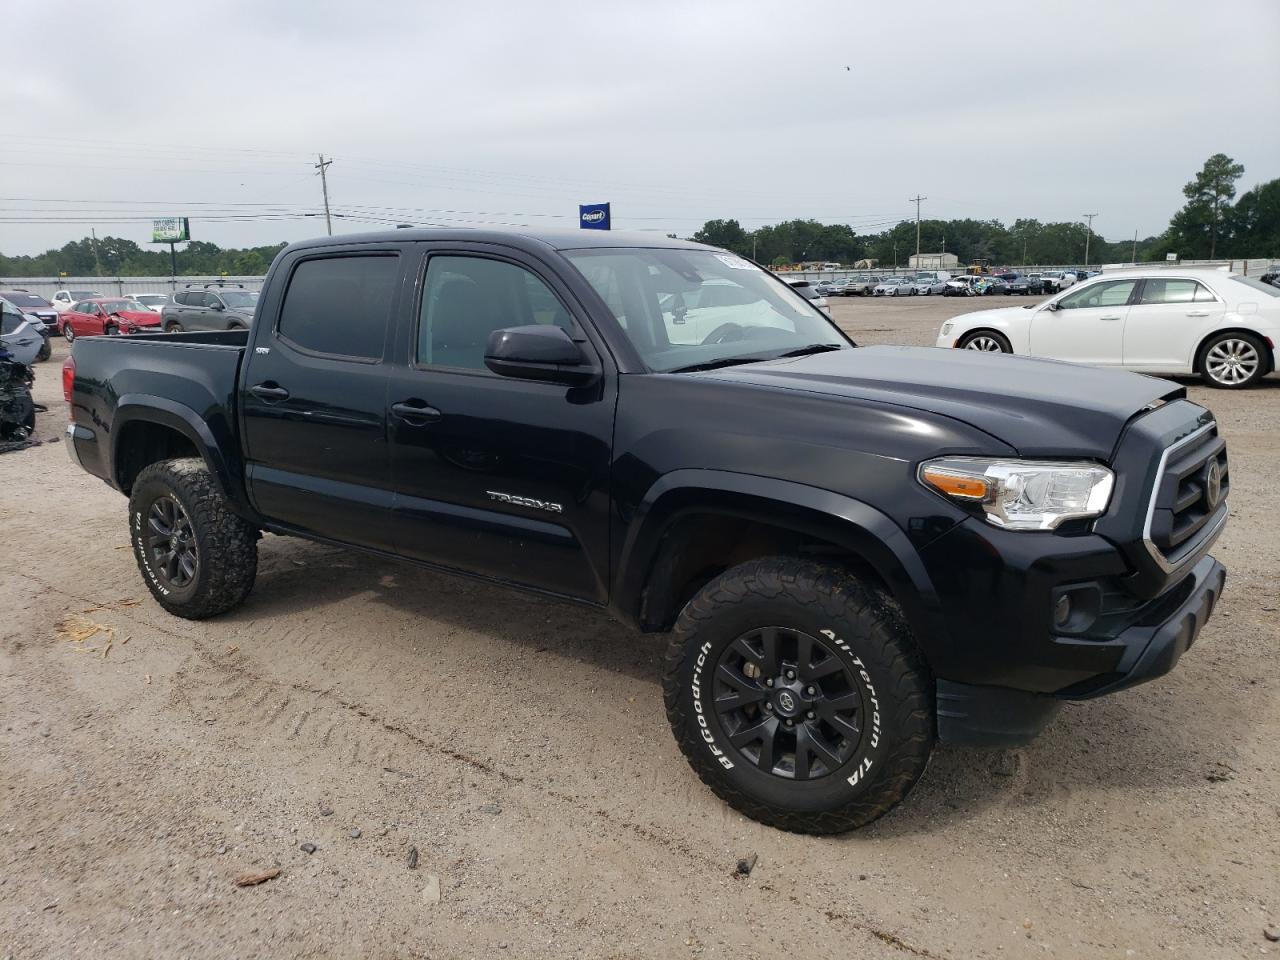 3TYAZ5CN7LT****** Salvage and Wrecked 2020 Toyota Tacoma in Alabama State